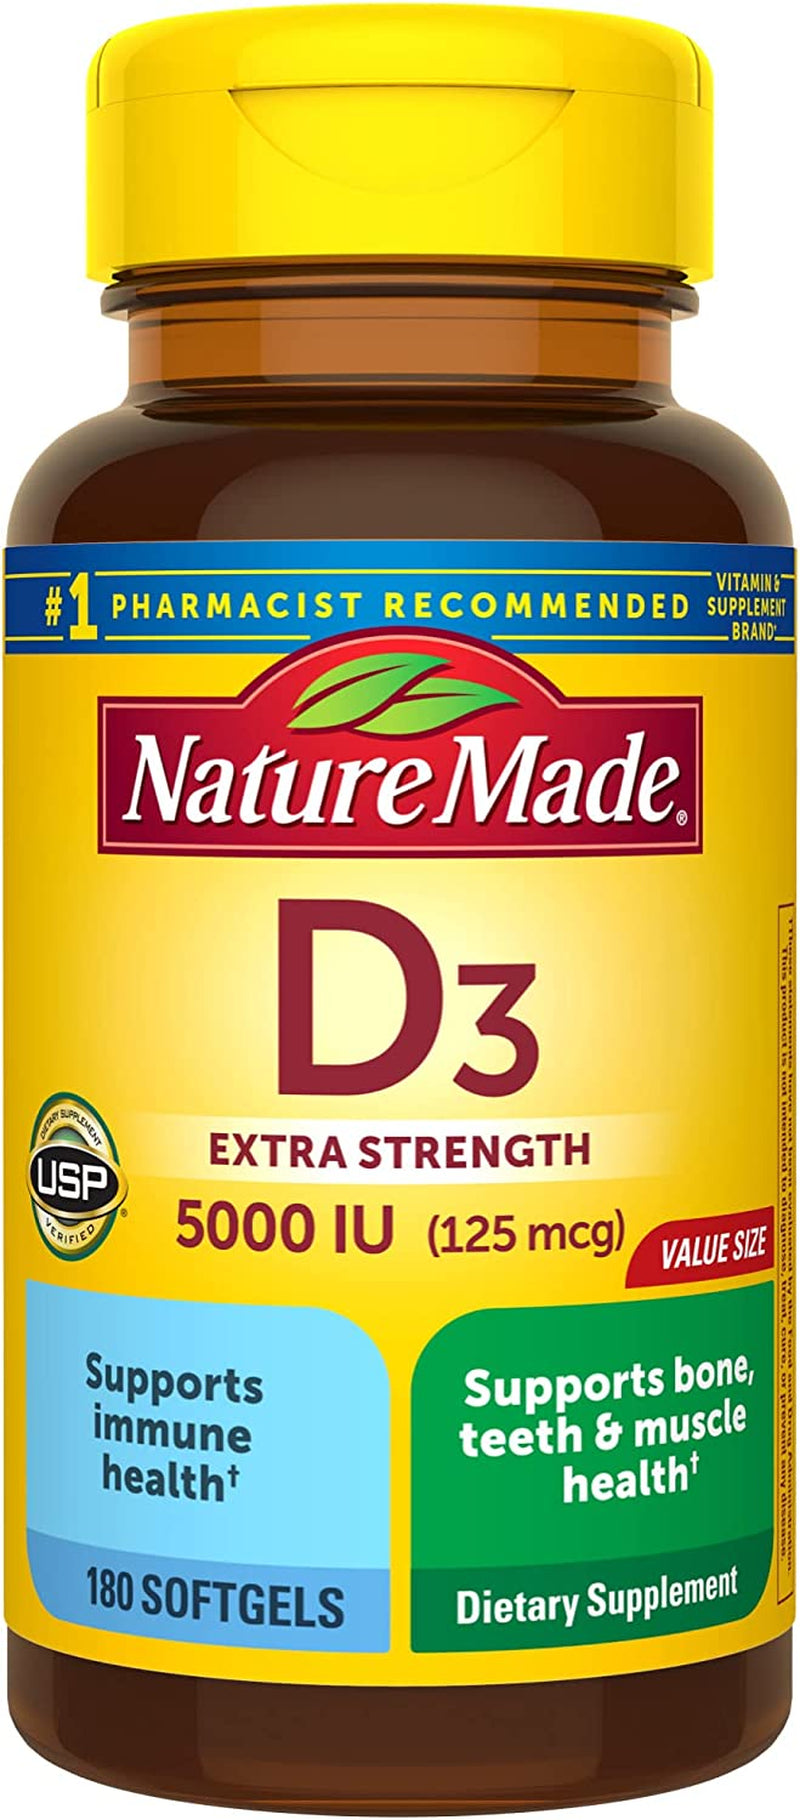 Extra Strength Vitamin D3 5000 IU (125 Mcg), Dietary Supplement for Bone, Teeth, Muscle and Immune Health Support, 180 Softgels, 180 Day Supply